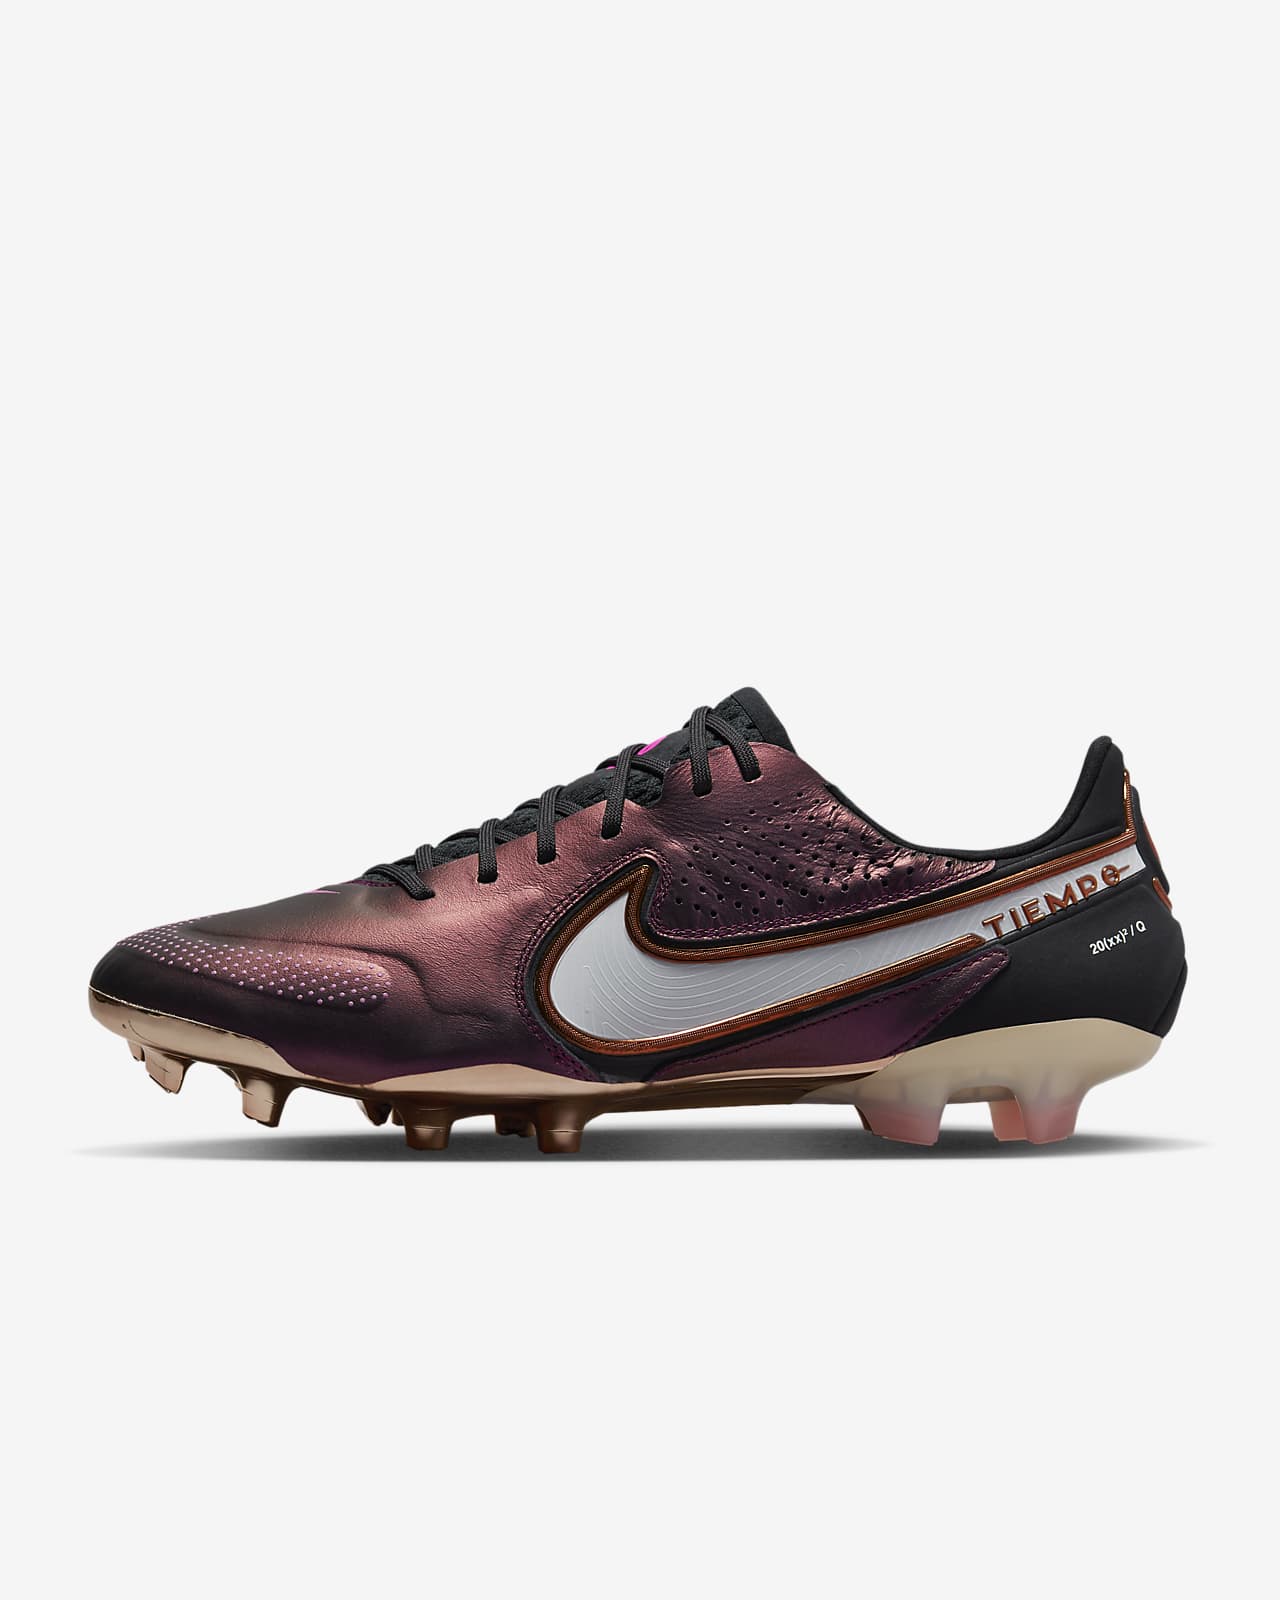 Nike Tiempo 9 Elite Firm-Ground Soccer Cleats. JP